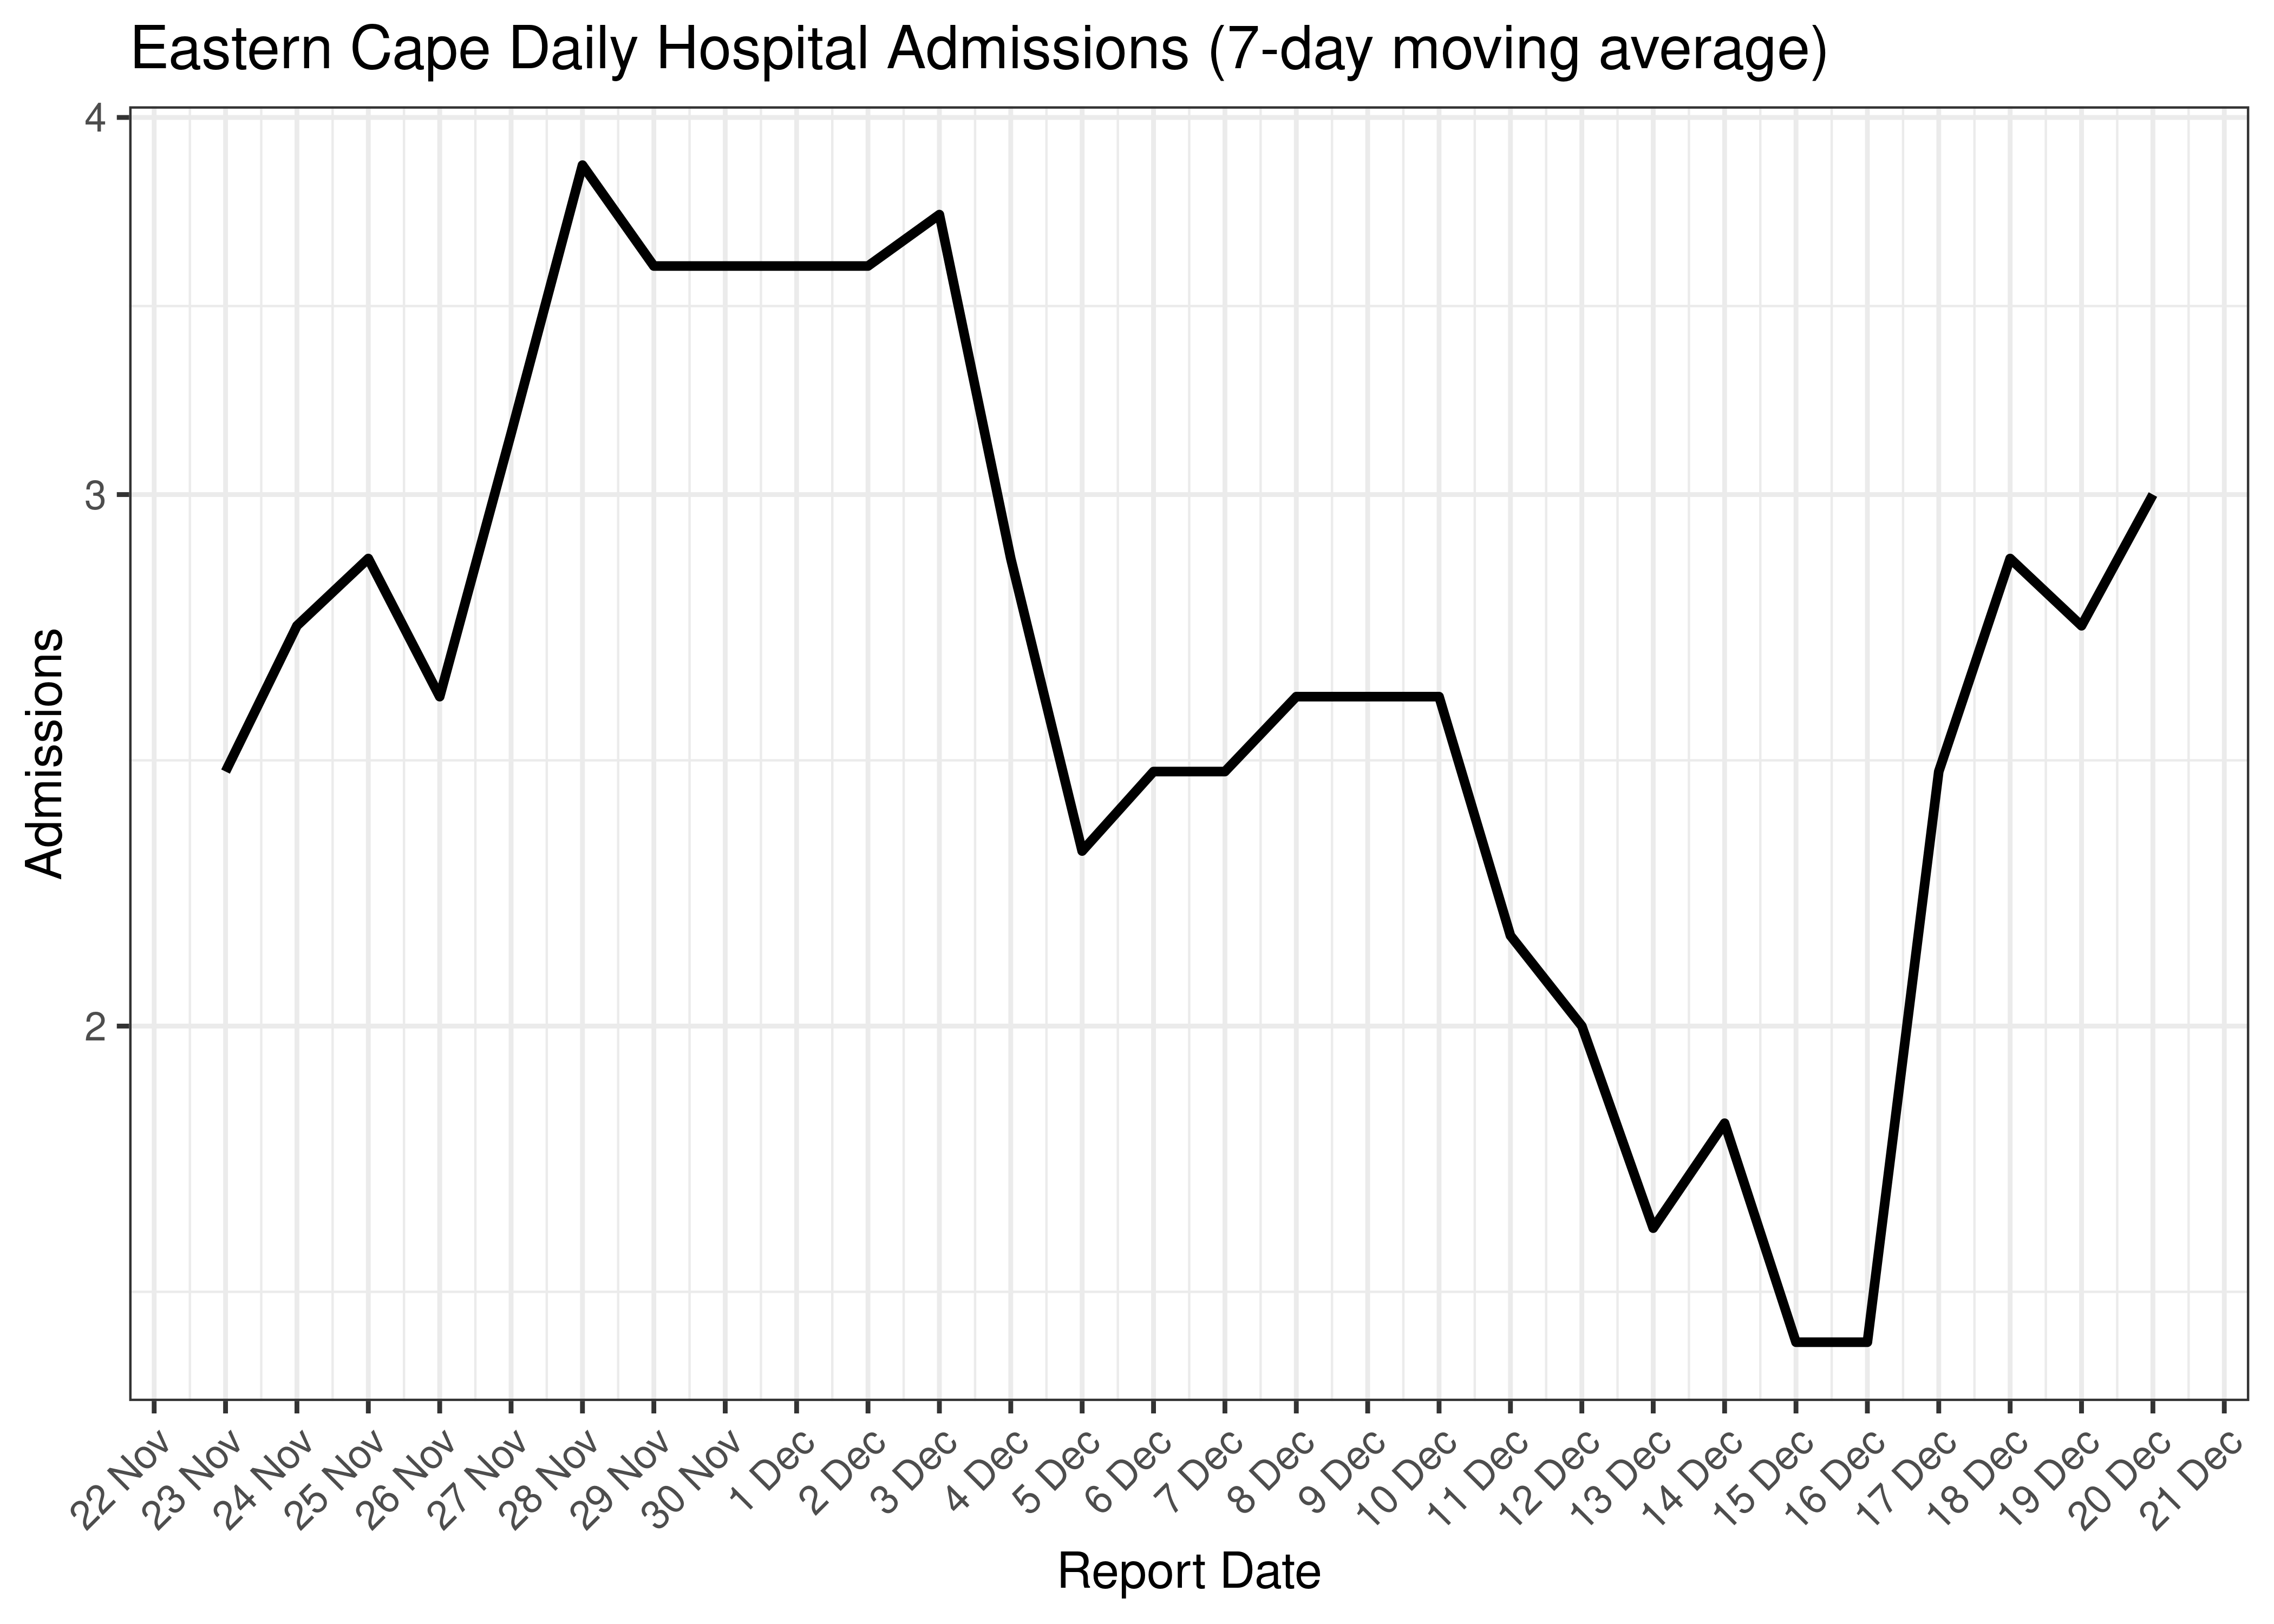 Eastern Cape Daily Hospital Admissions for Last 30-days (7-day moving average)